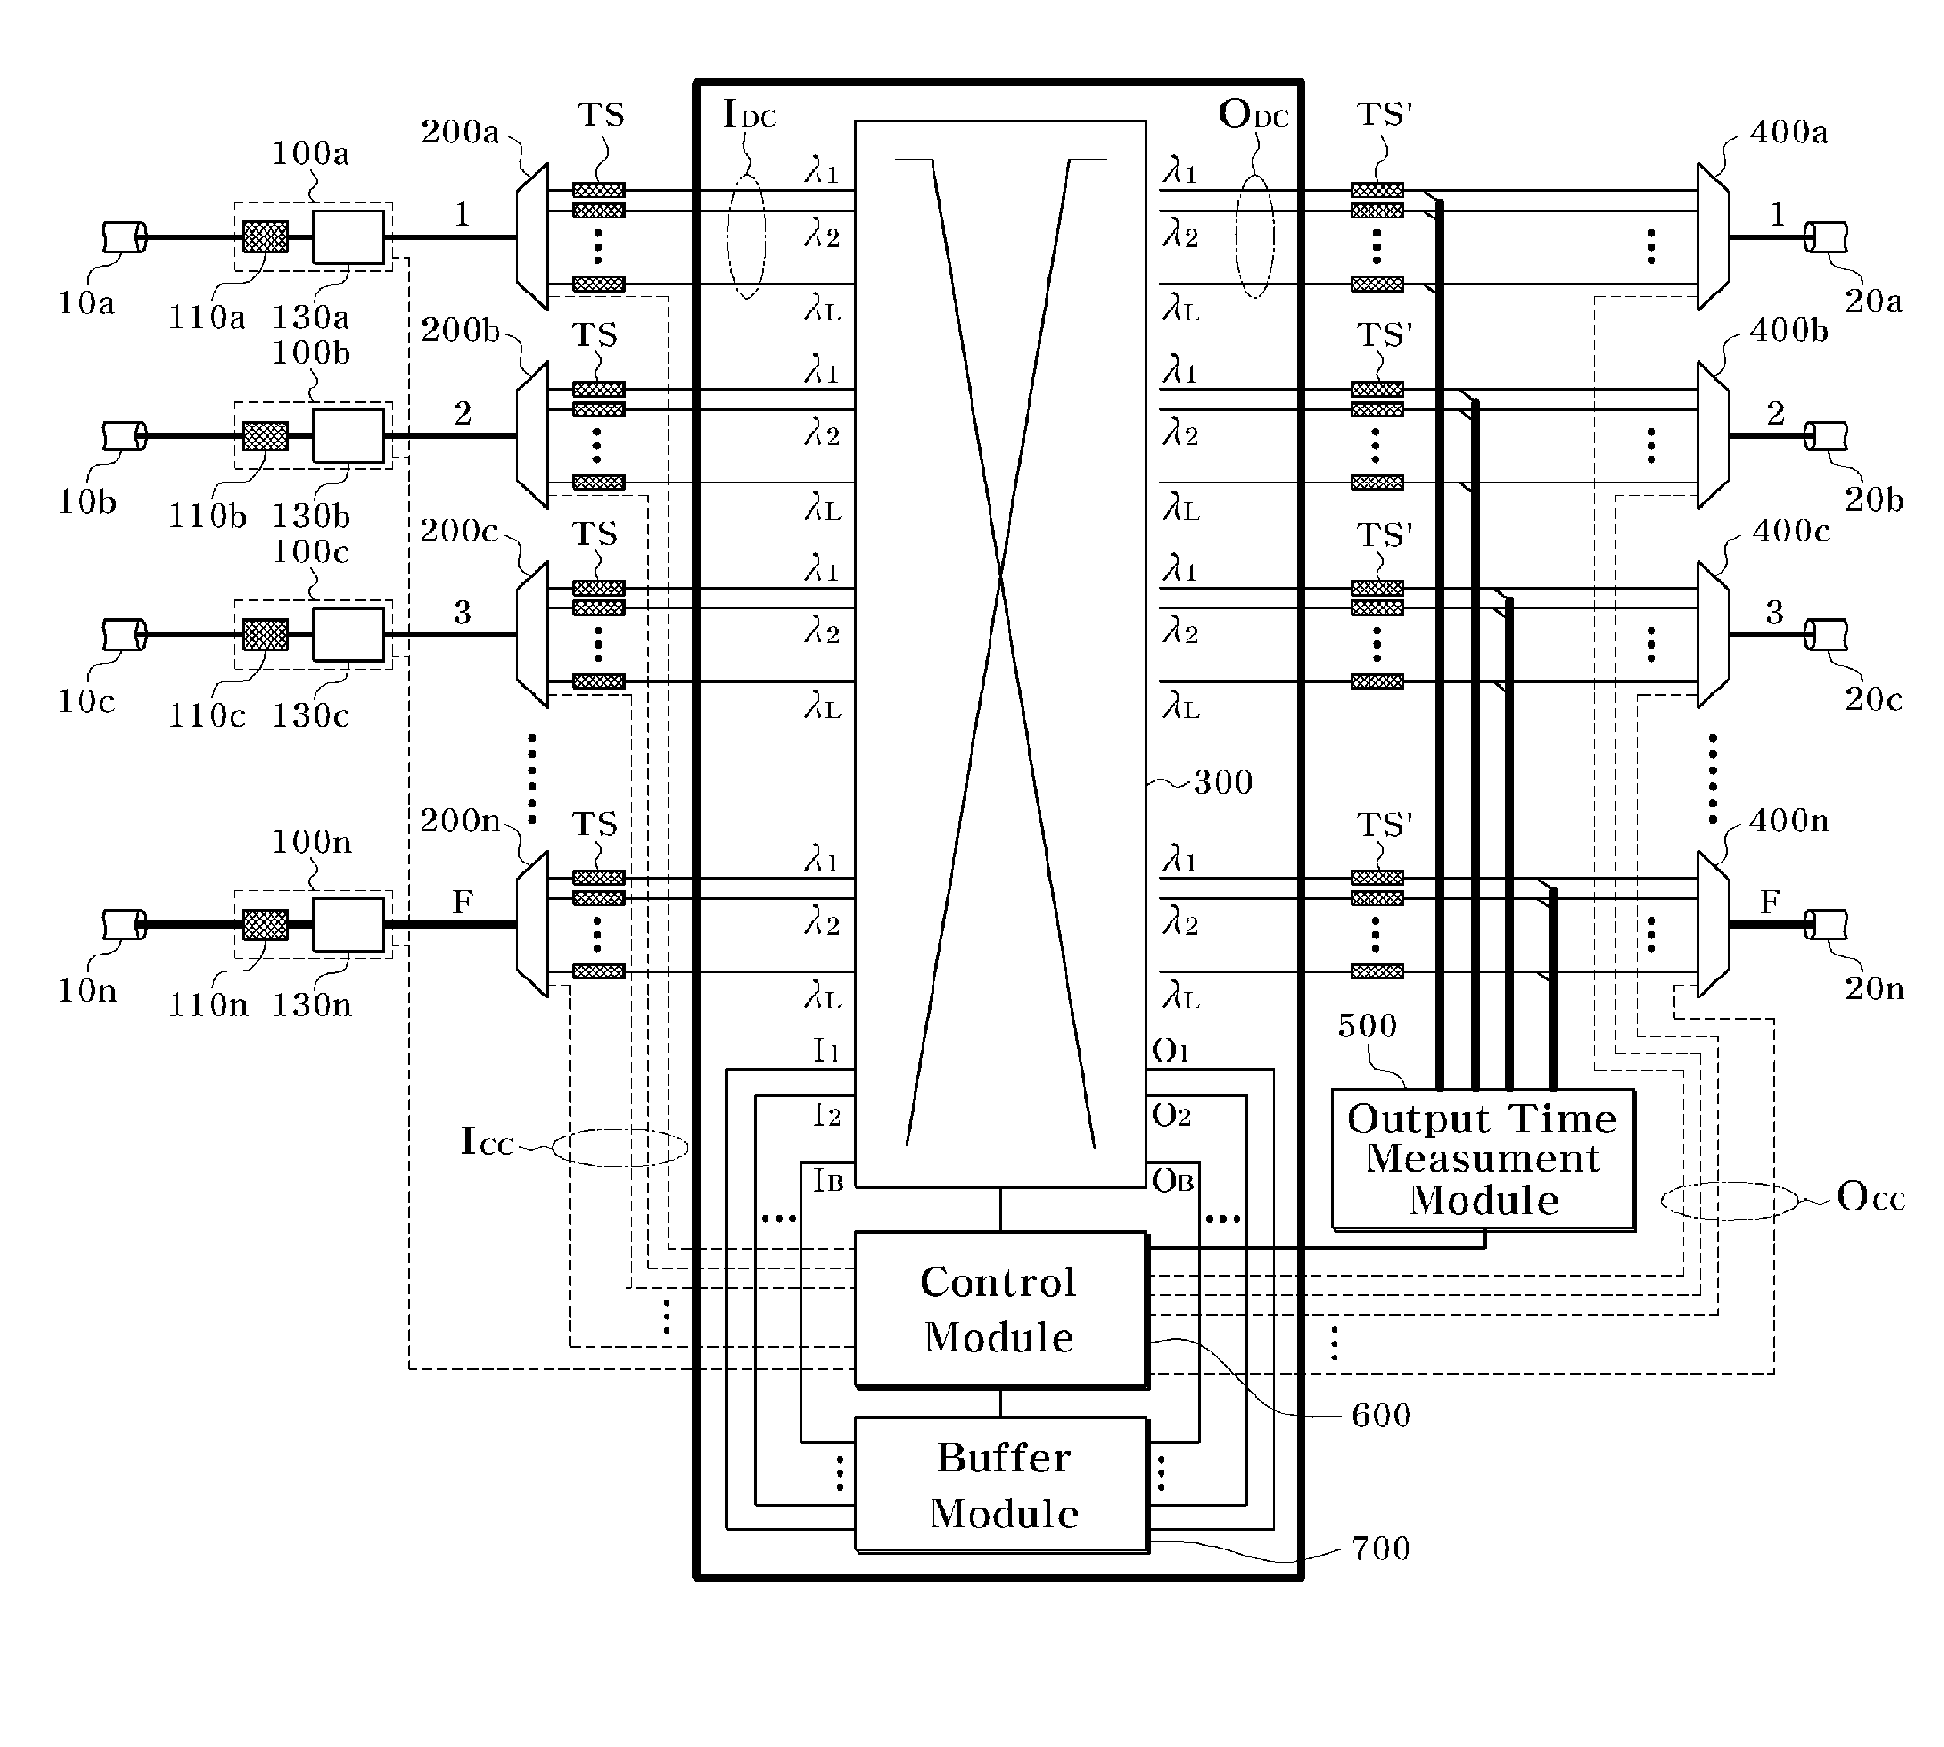 Apparatus for Transferring Optical Data in Optical Switching System Using Time Synchronization